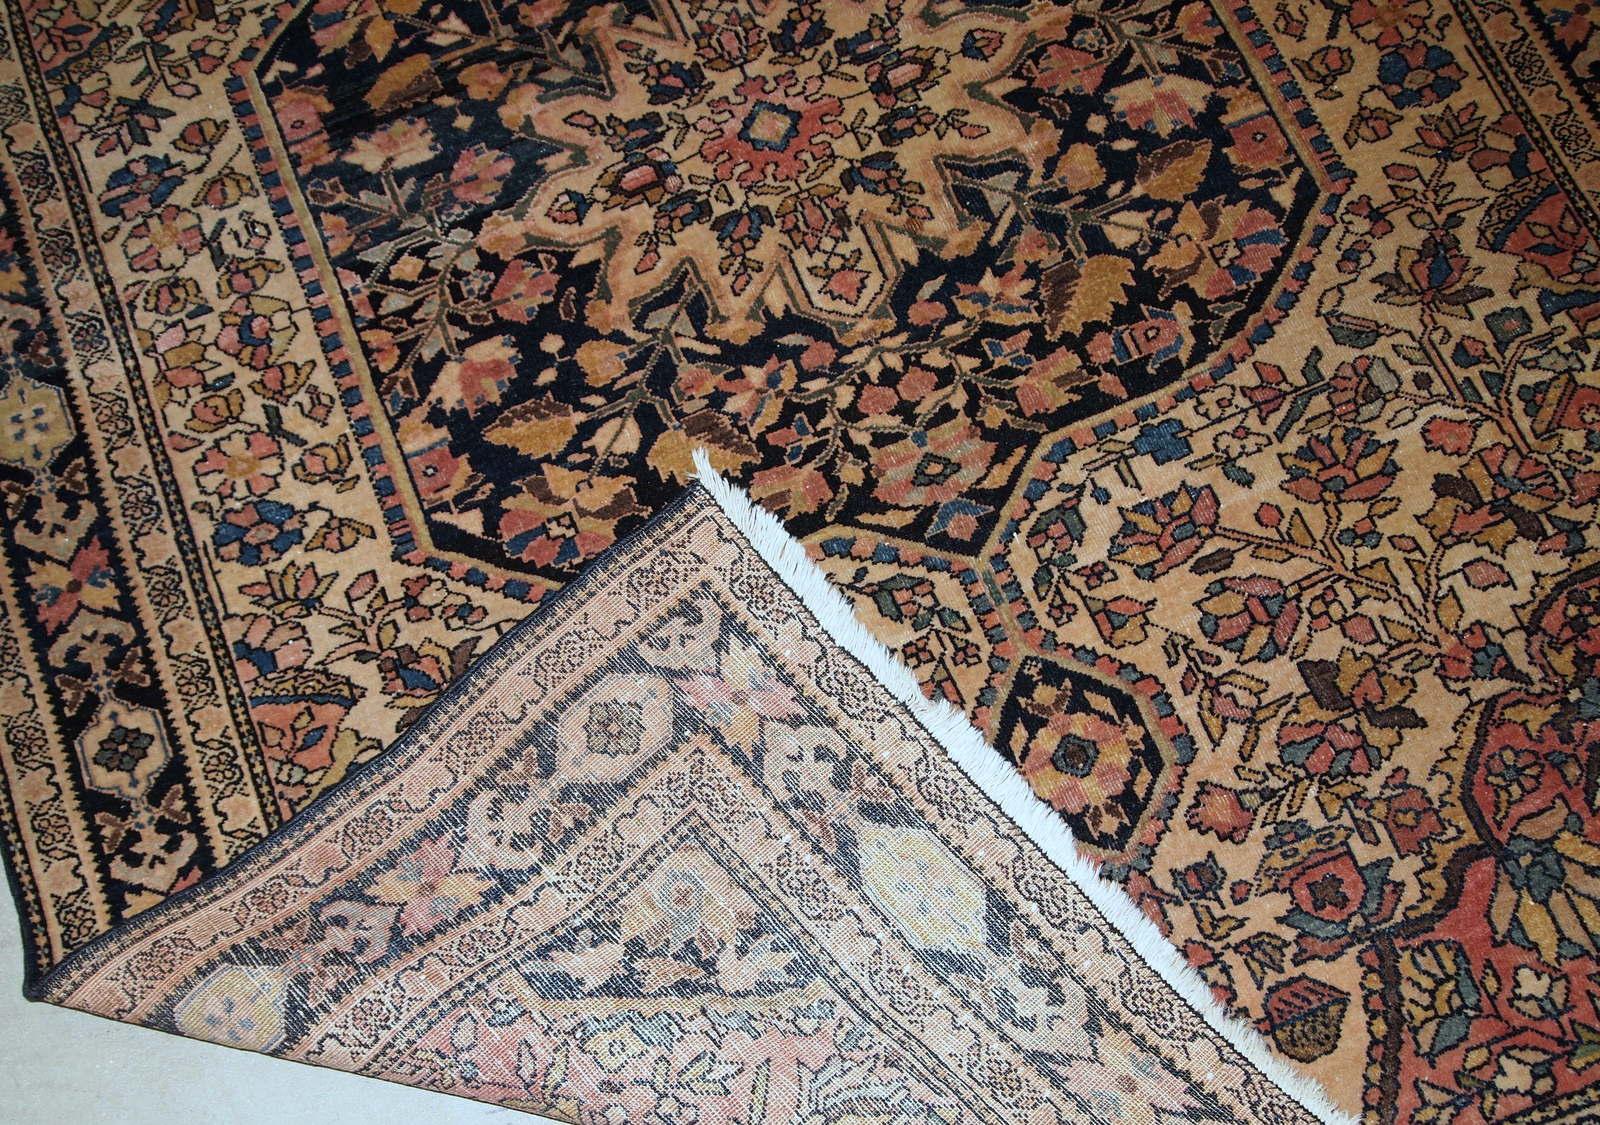 Handmade antique Sarouk Farahan rug in original good condition, has some low pile. The rug has been made in the beginning of 20th century.

- Condition: original, some low pile,

- circa 1900s,

- Size: 4' x 6.3' (122cm x 192cm),

-